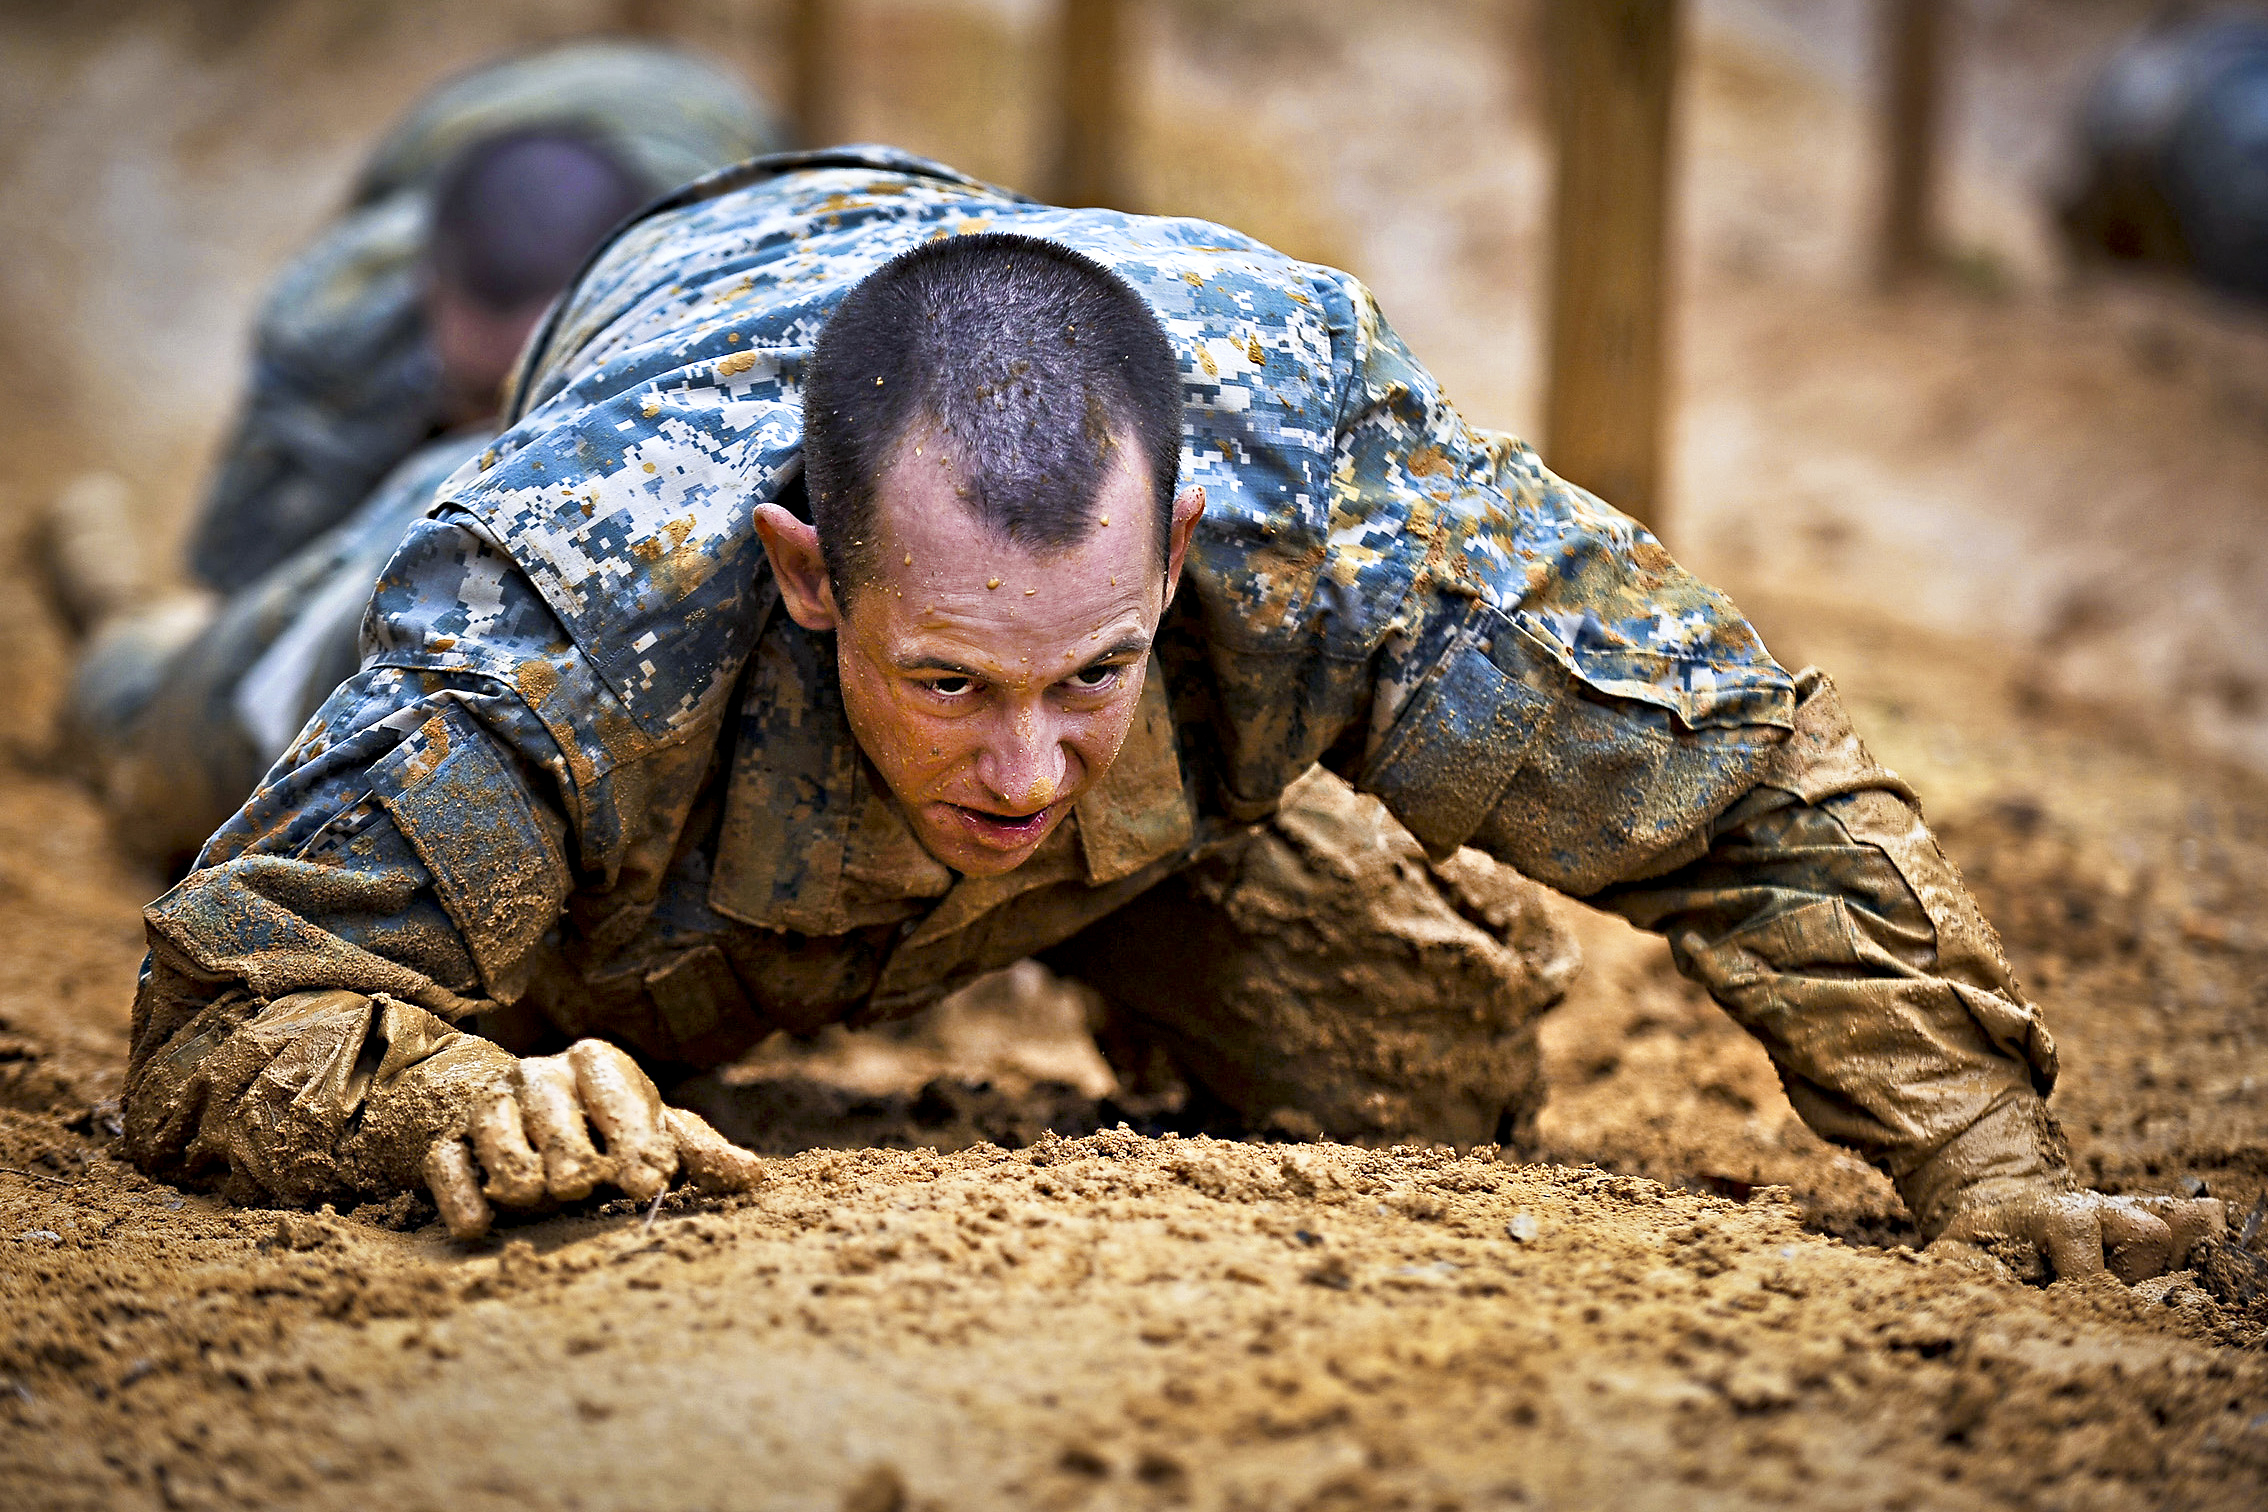 U.S. Army Soldiers from the One Station Unit Training (OSUT) low crawl while negotiating an obstacle course during their first week of Basic Training in Ft. Benning, Ga. March 9, 2012. OSUT is a training program in which recruits remain with the same unit for both Basic Combat Training (BCT) and Advanced Individual Training (AIT). (U.S. Army photo by Staff Sgt. Teddy Wade/ Released)